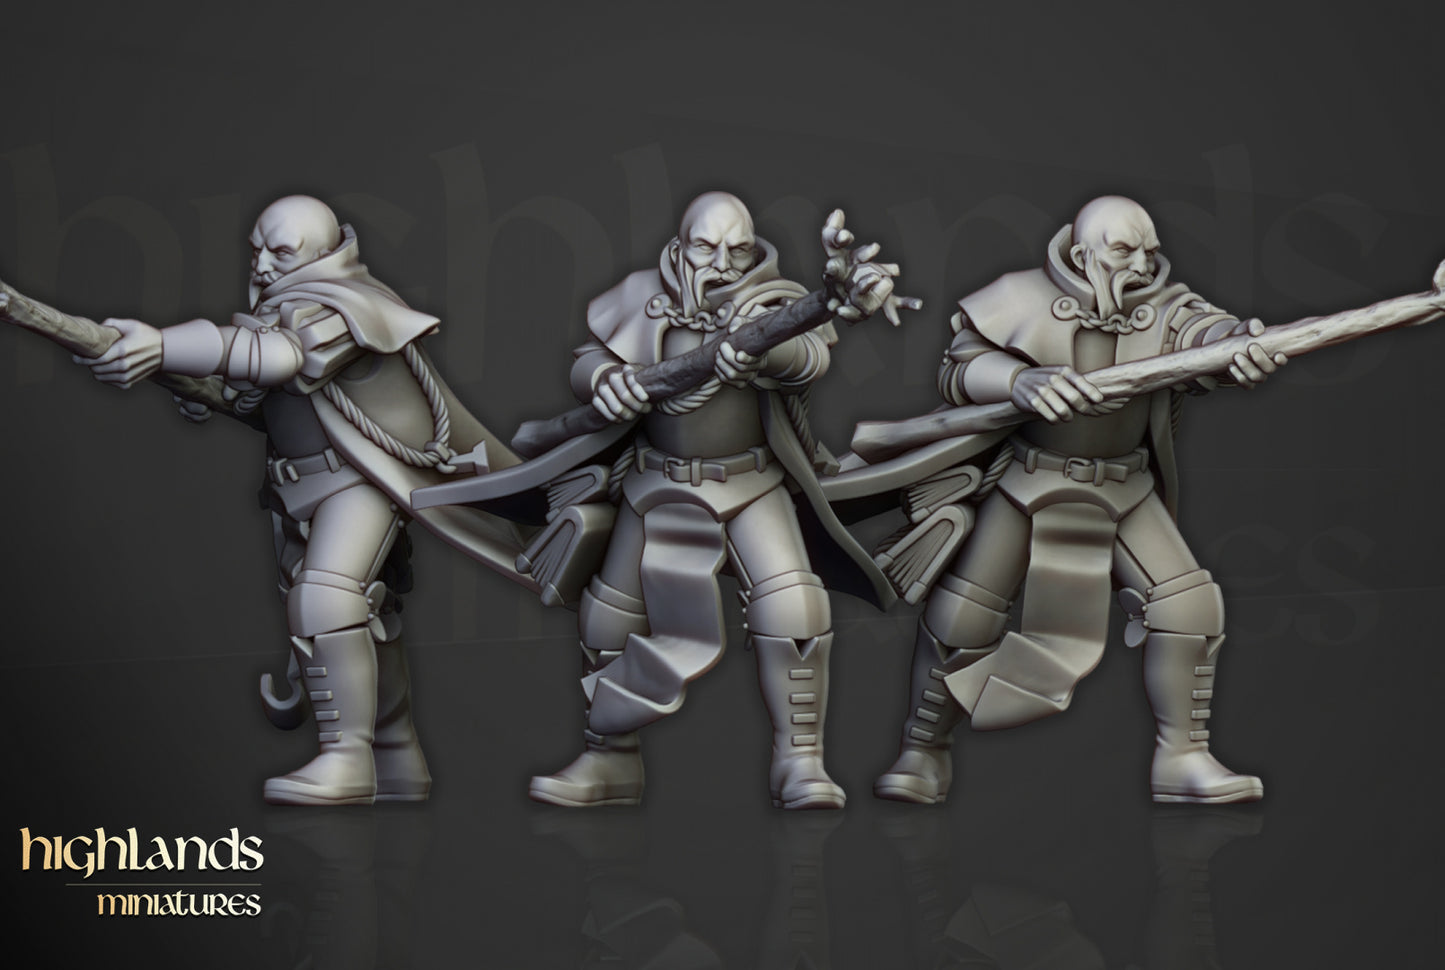 Battle Wizards by Highlands Miniatures